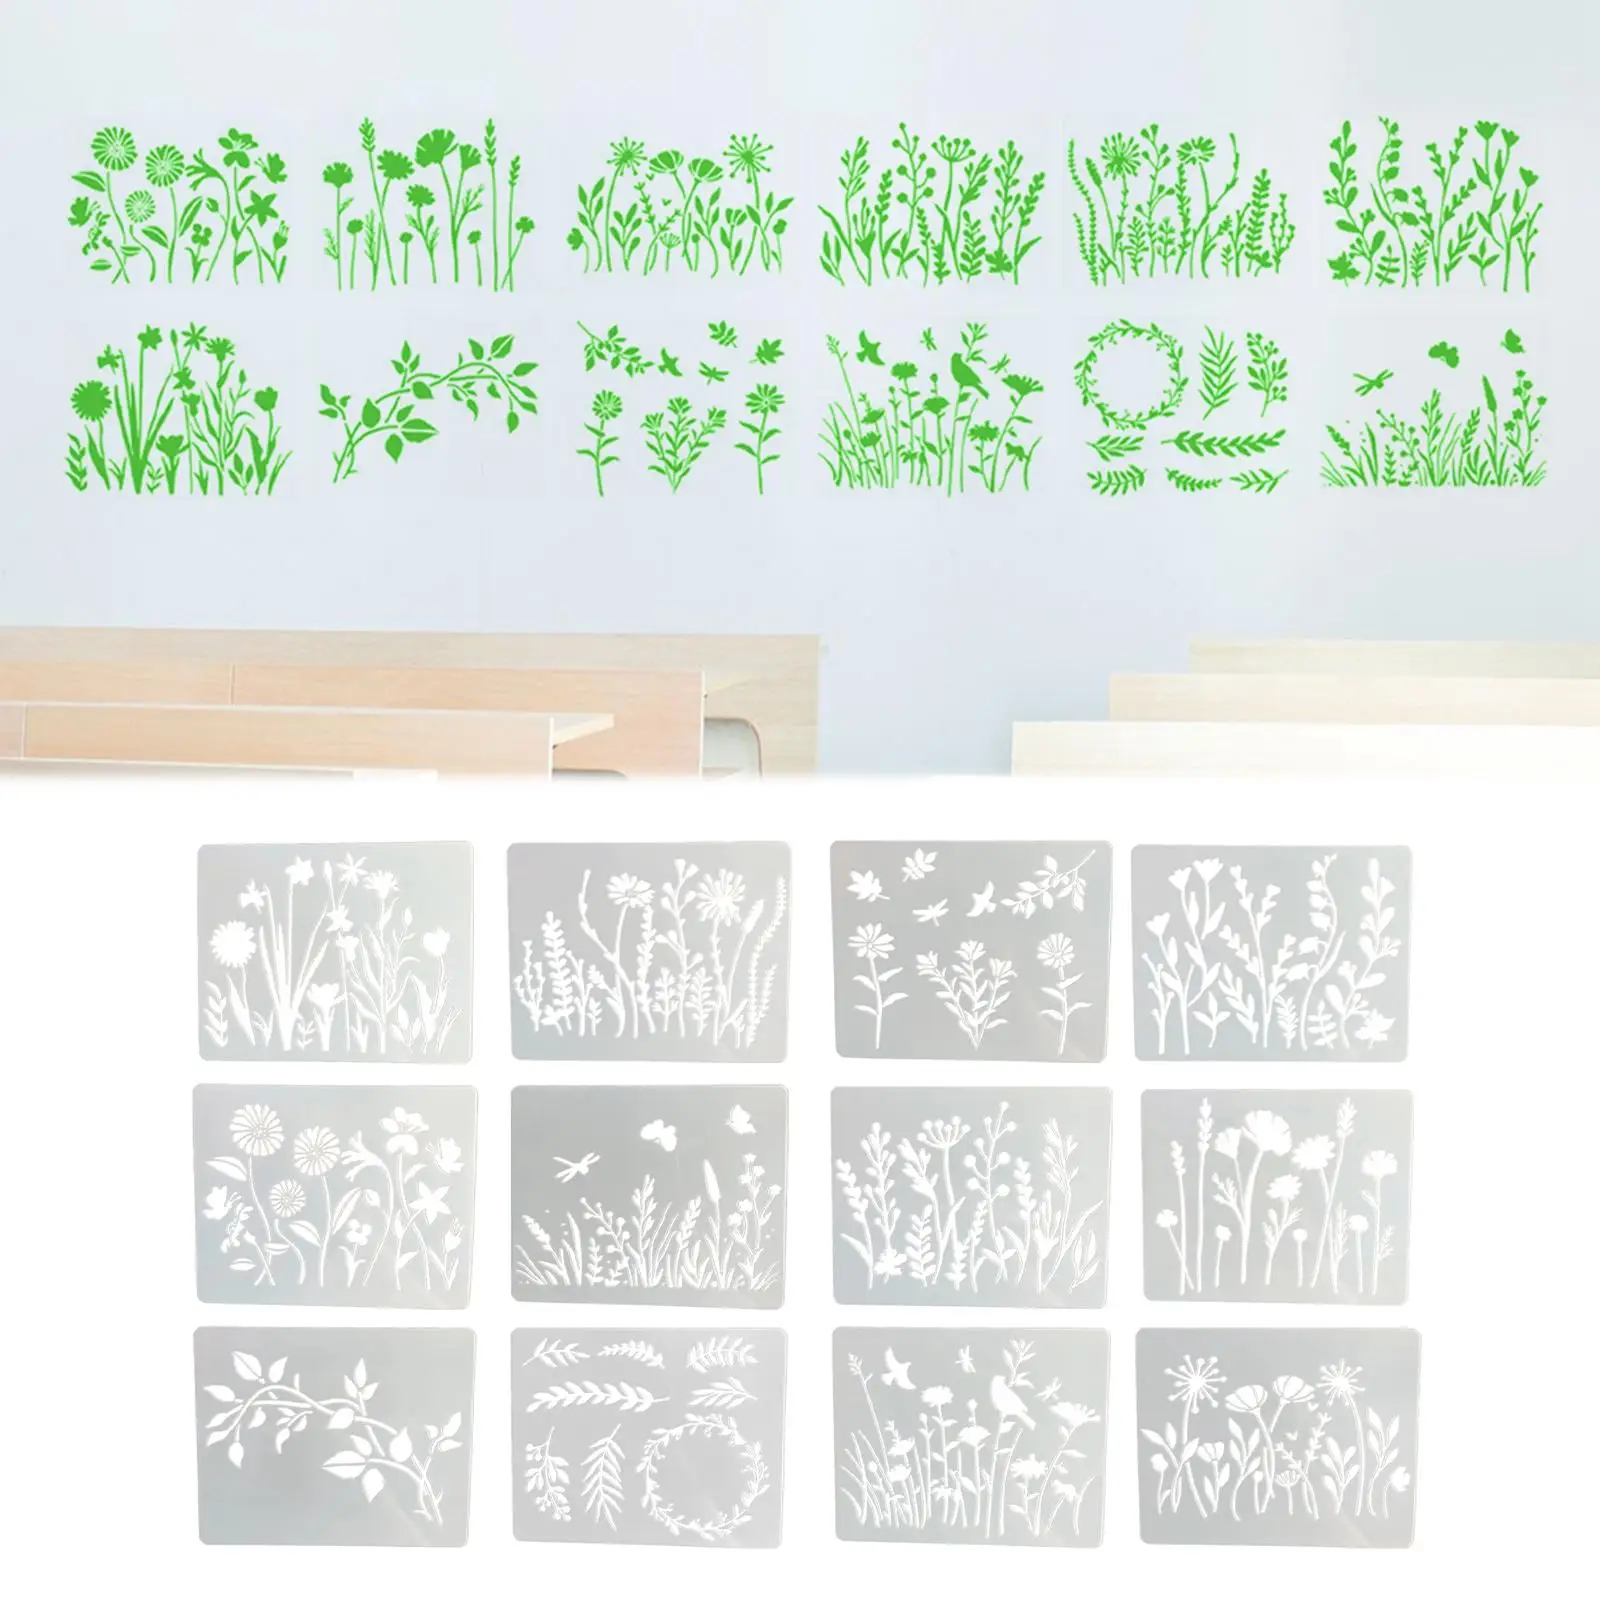 12x Resin Flower Stencil Template Scrapbook Painting Drawing Floral Decorative Spring Summer Ruler for Fabric Wood Canvas Album